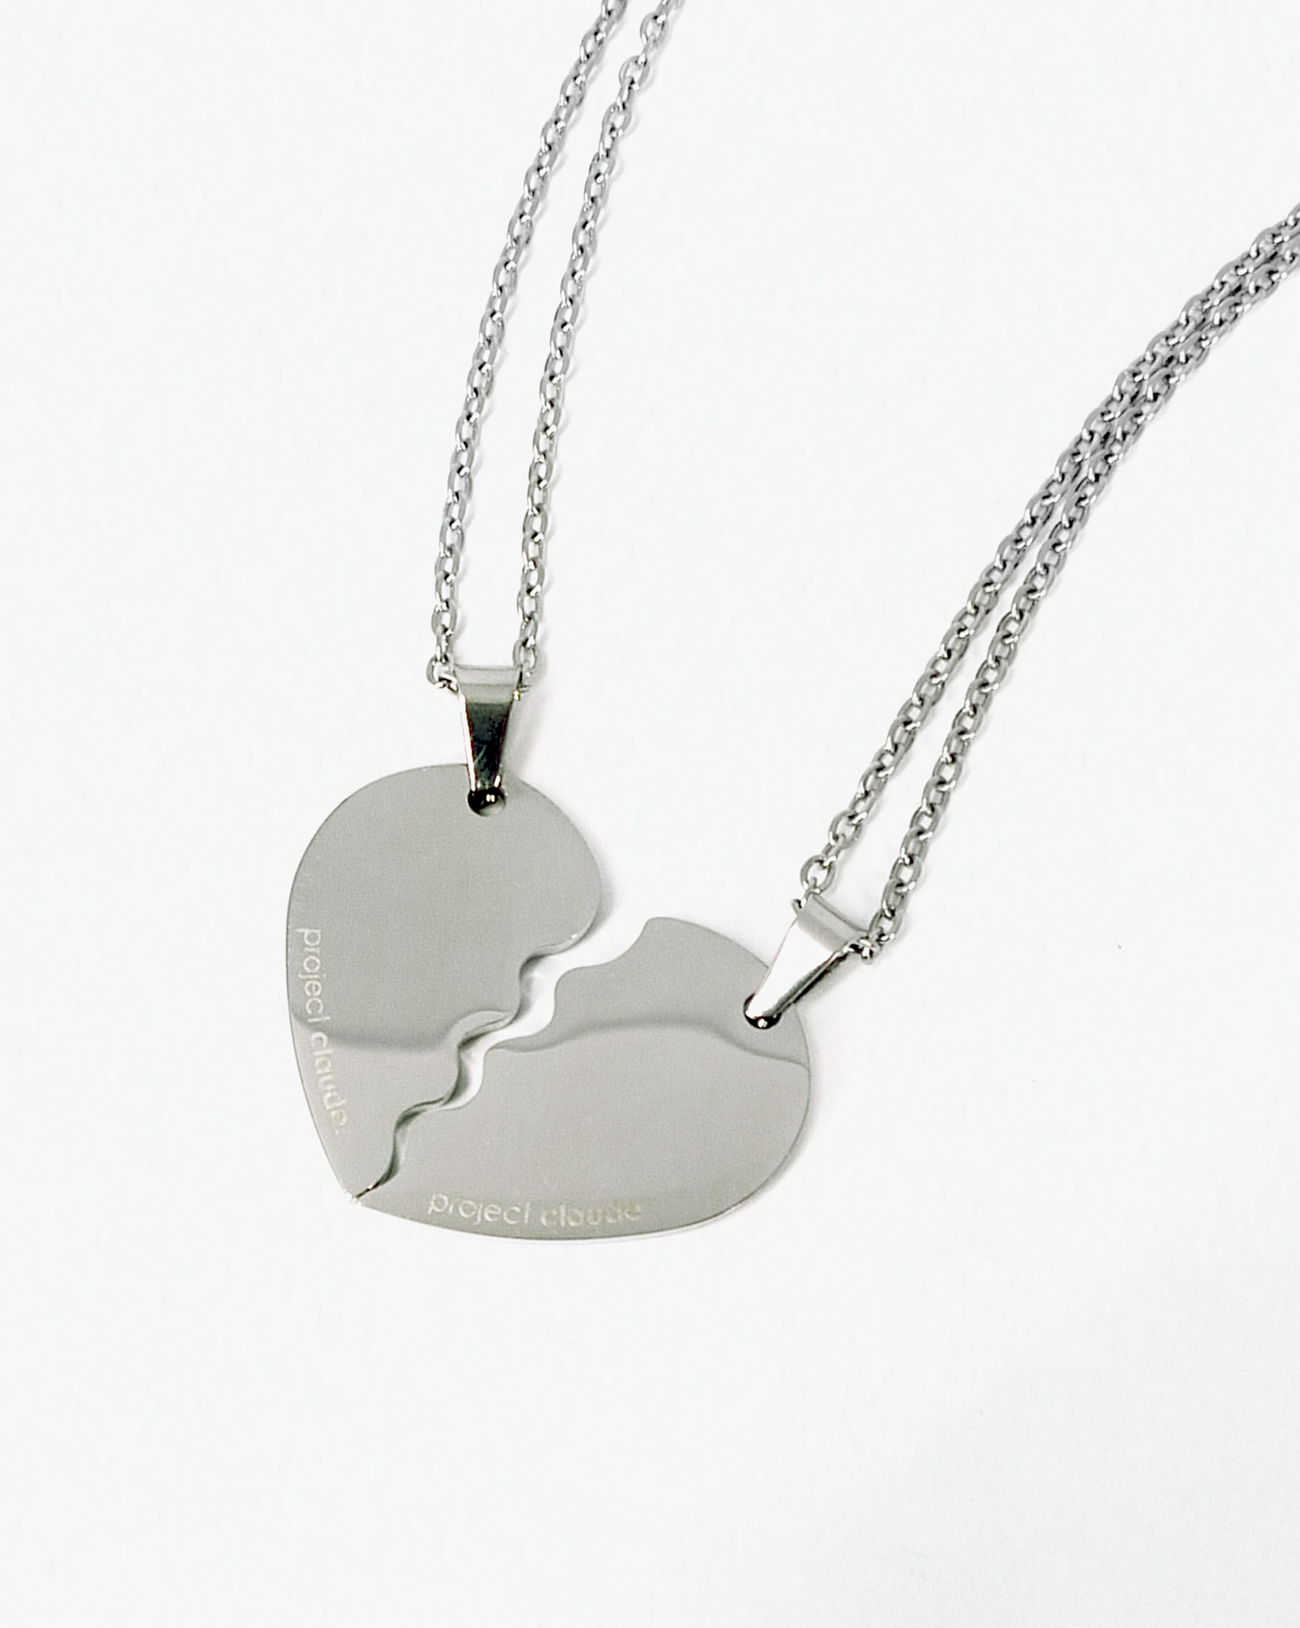 (Boy) Friends Forever Necklace.